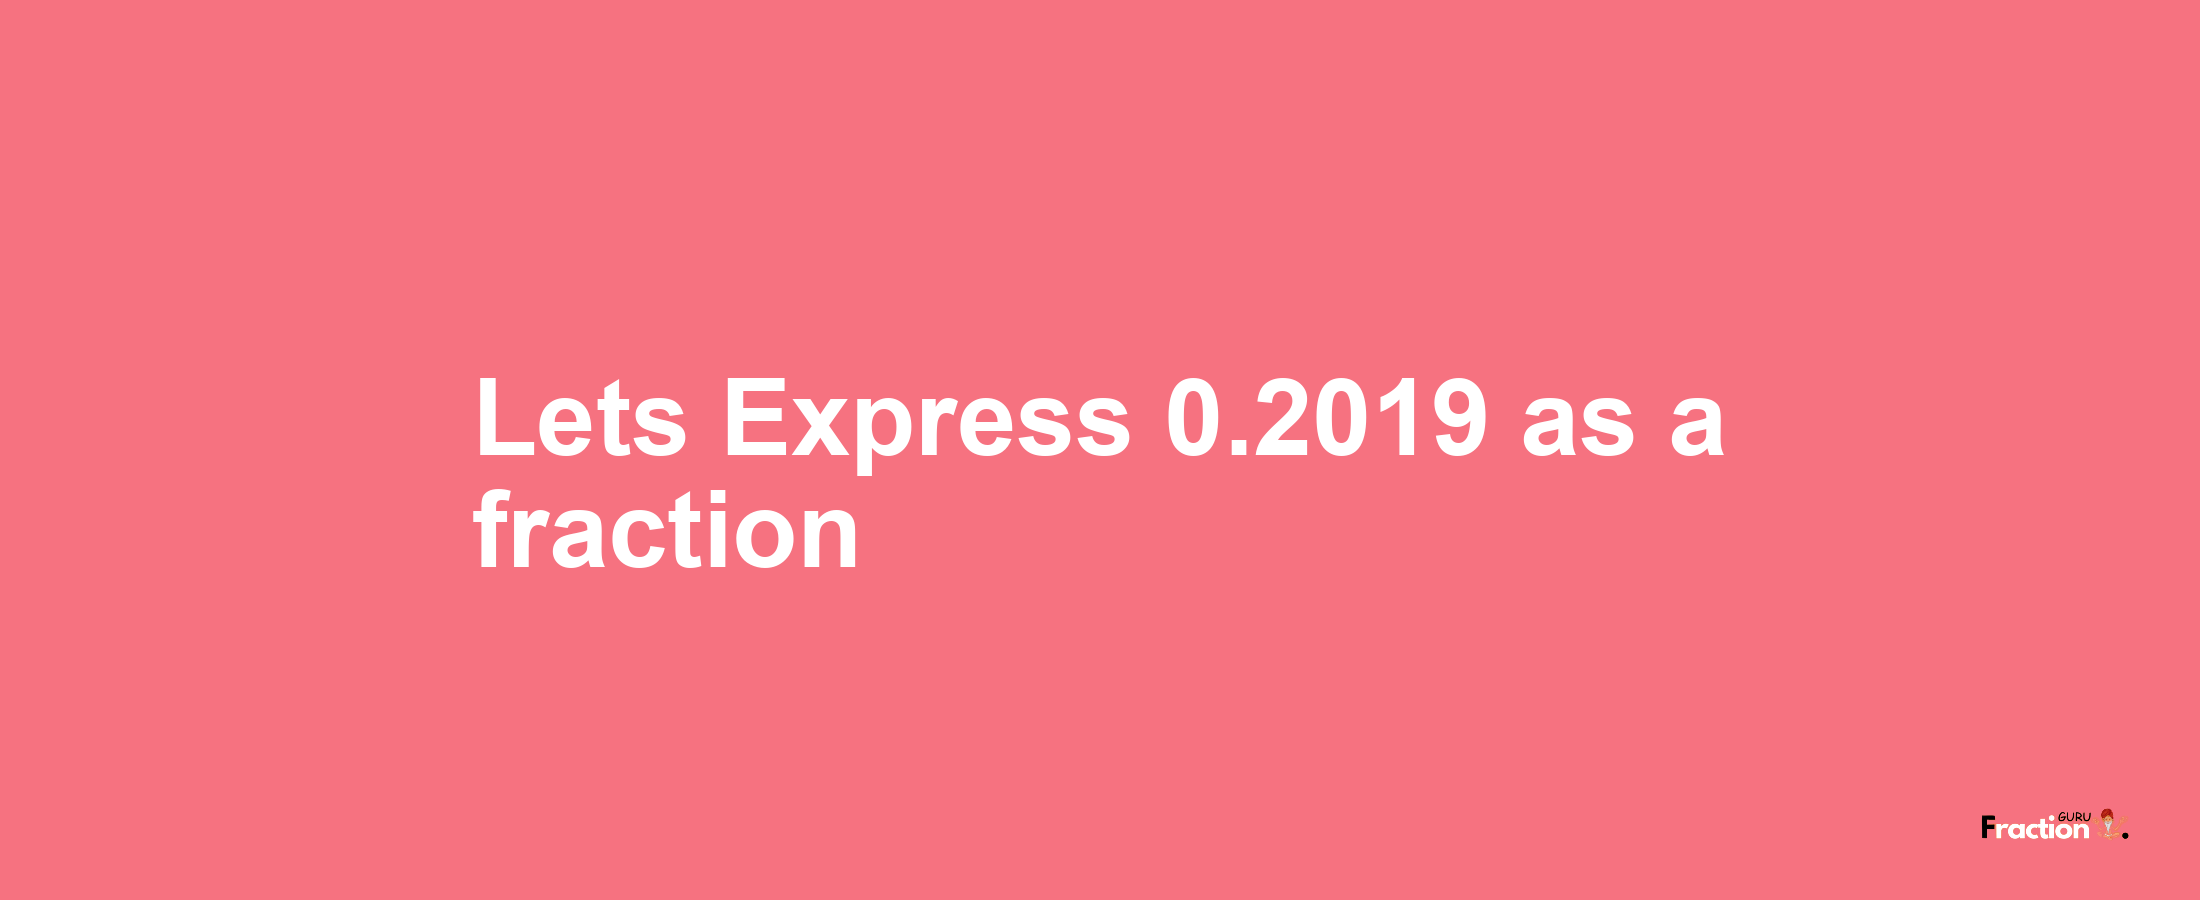 Lets Express 0.2019 as afraction